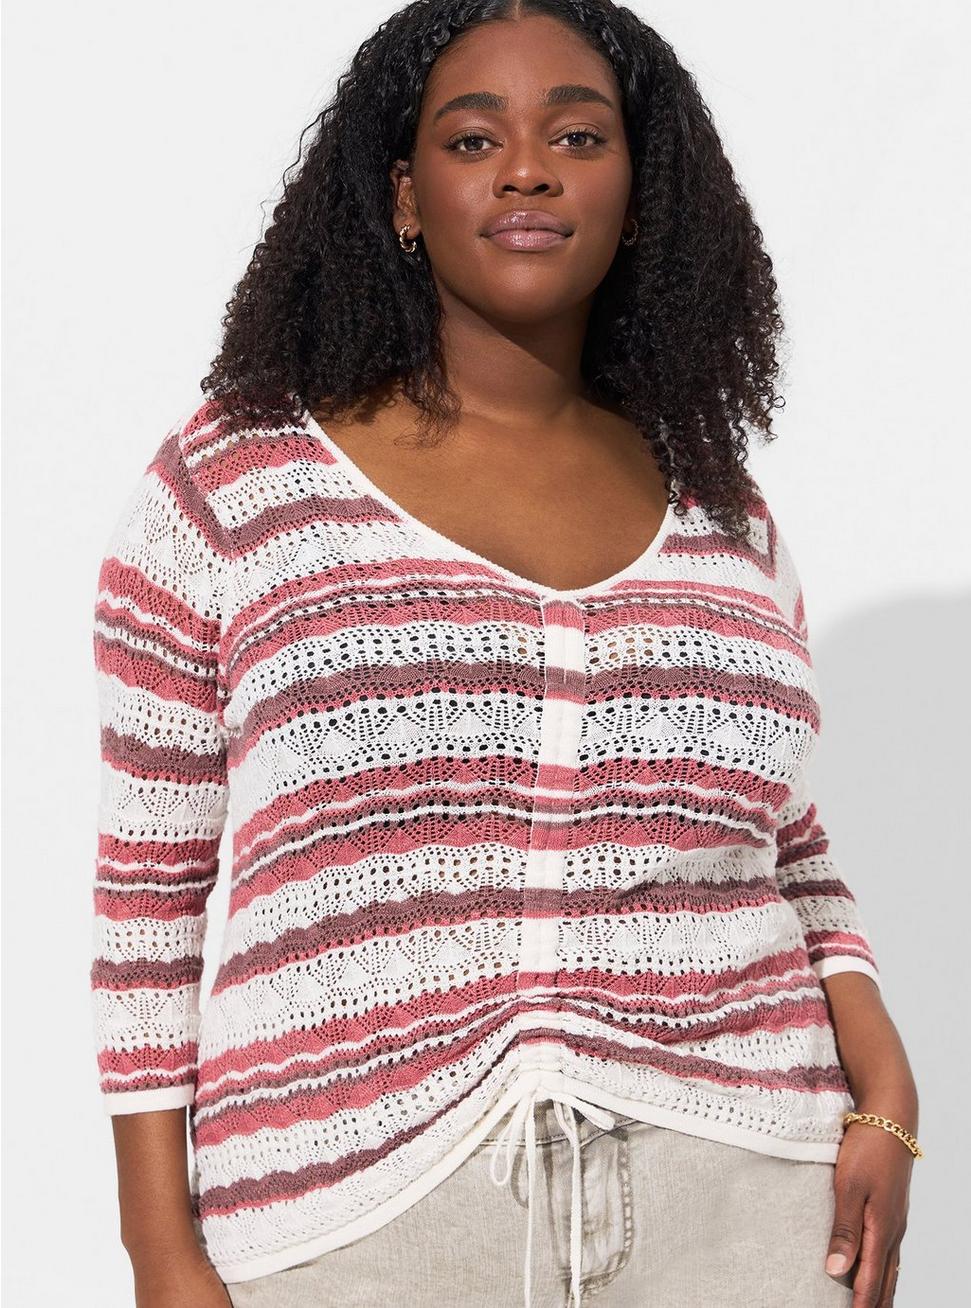 Open Stitch Pullover V-Neck Cinched Front Sweater, PINK STRIPE, hi-res